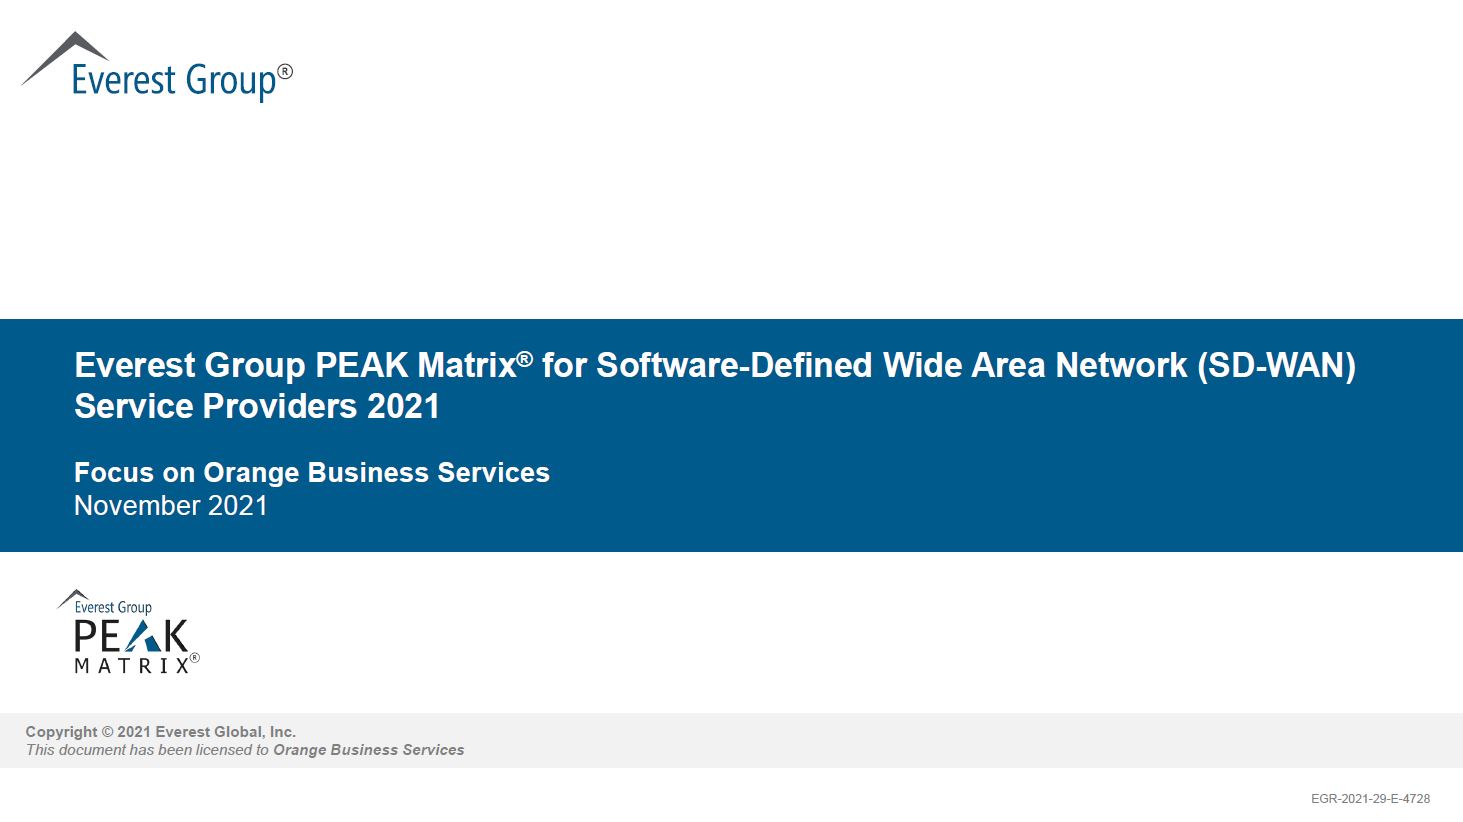 Everest Group PEAK Matrix for Software-Defined Wide Area Network (SD-WAN) Service Providers 2021